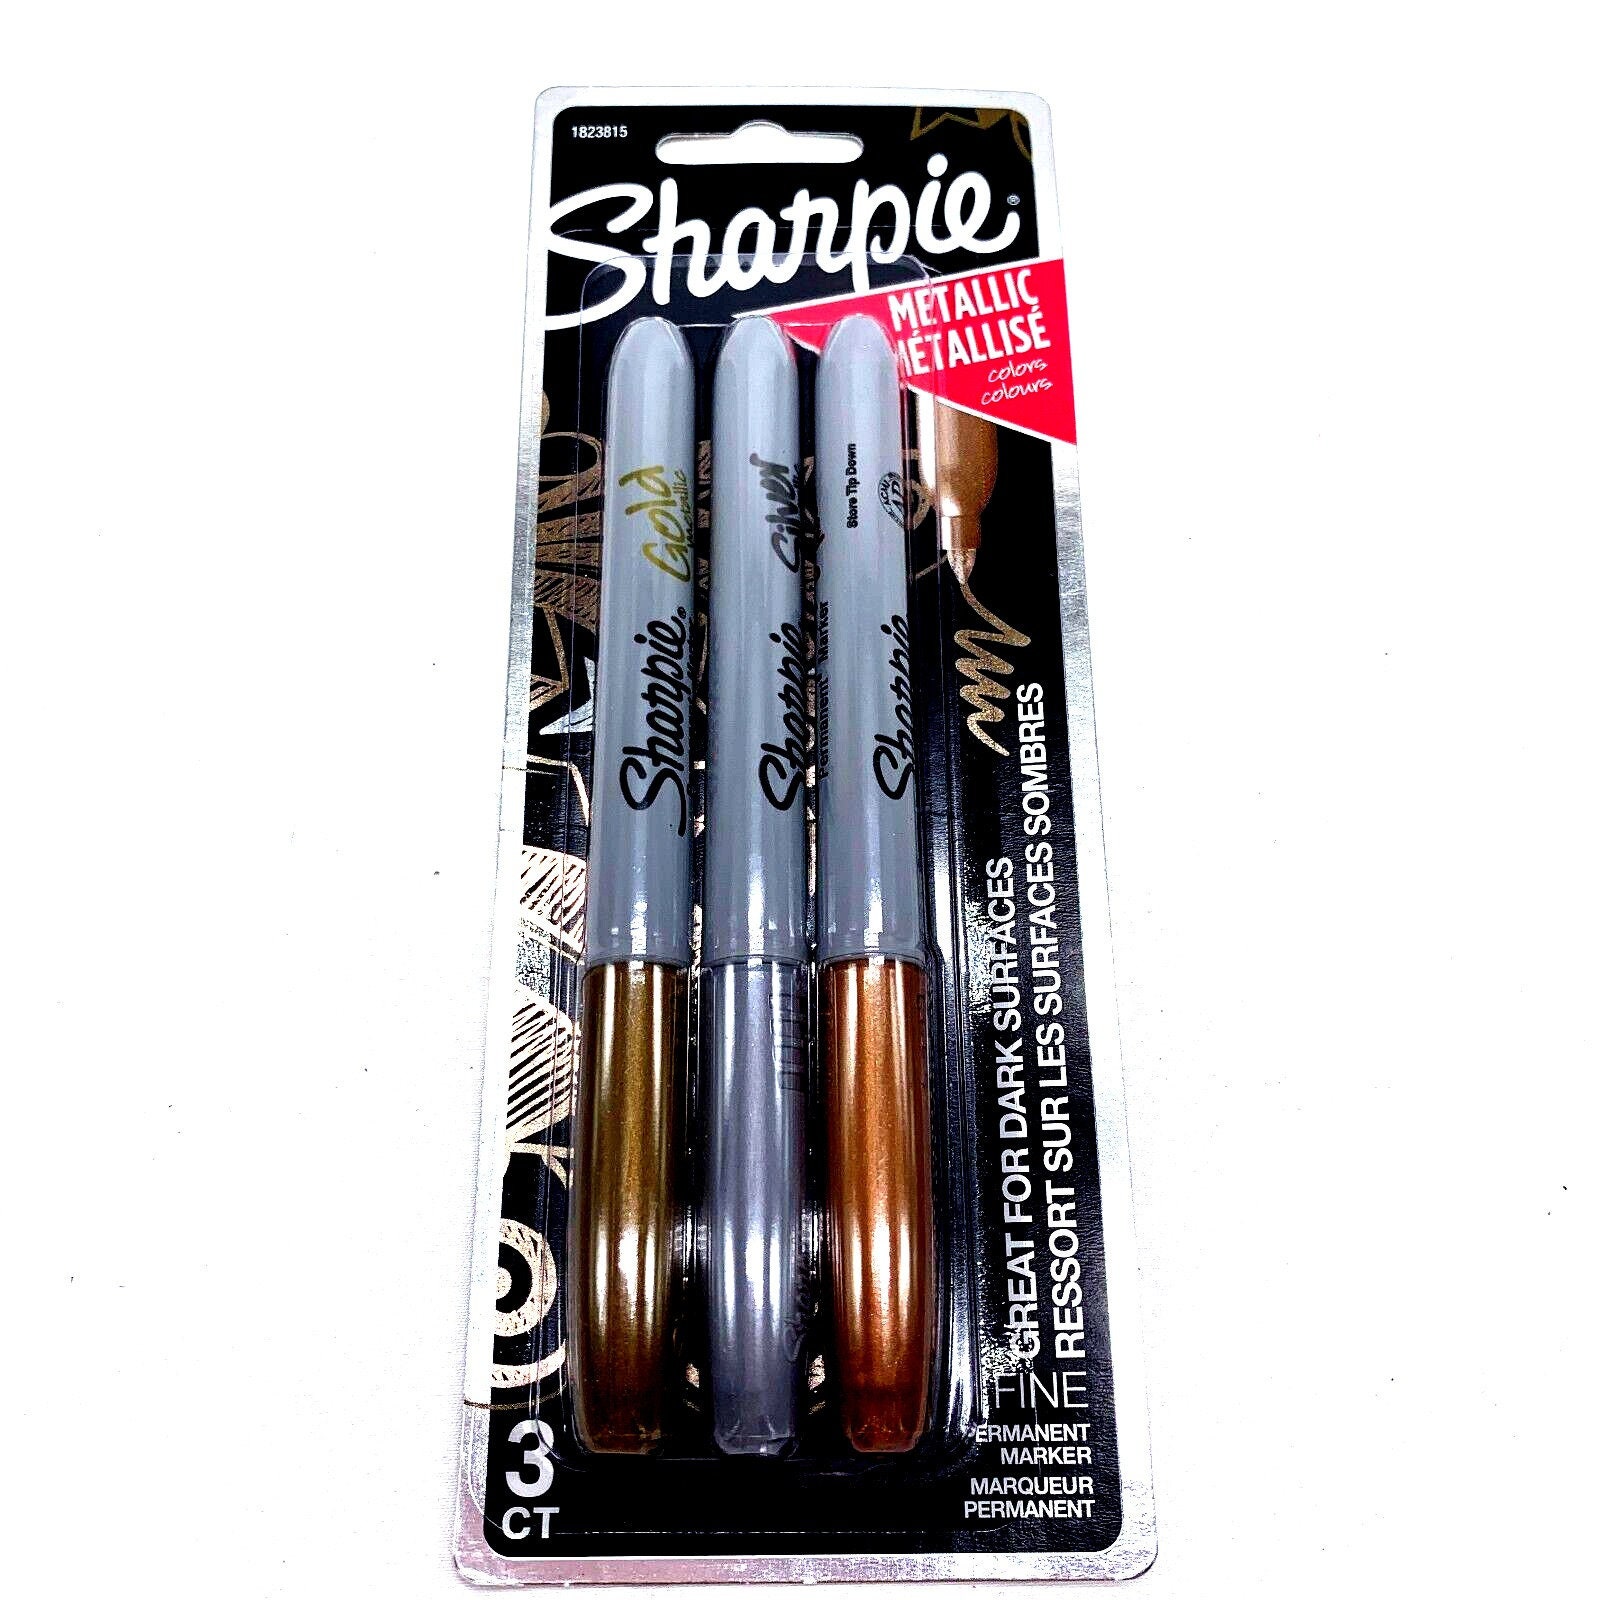 Color Sharpie Ultra-fine-point Permanent Markers, 24 Pack Colored